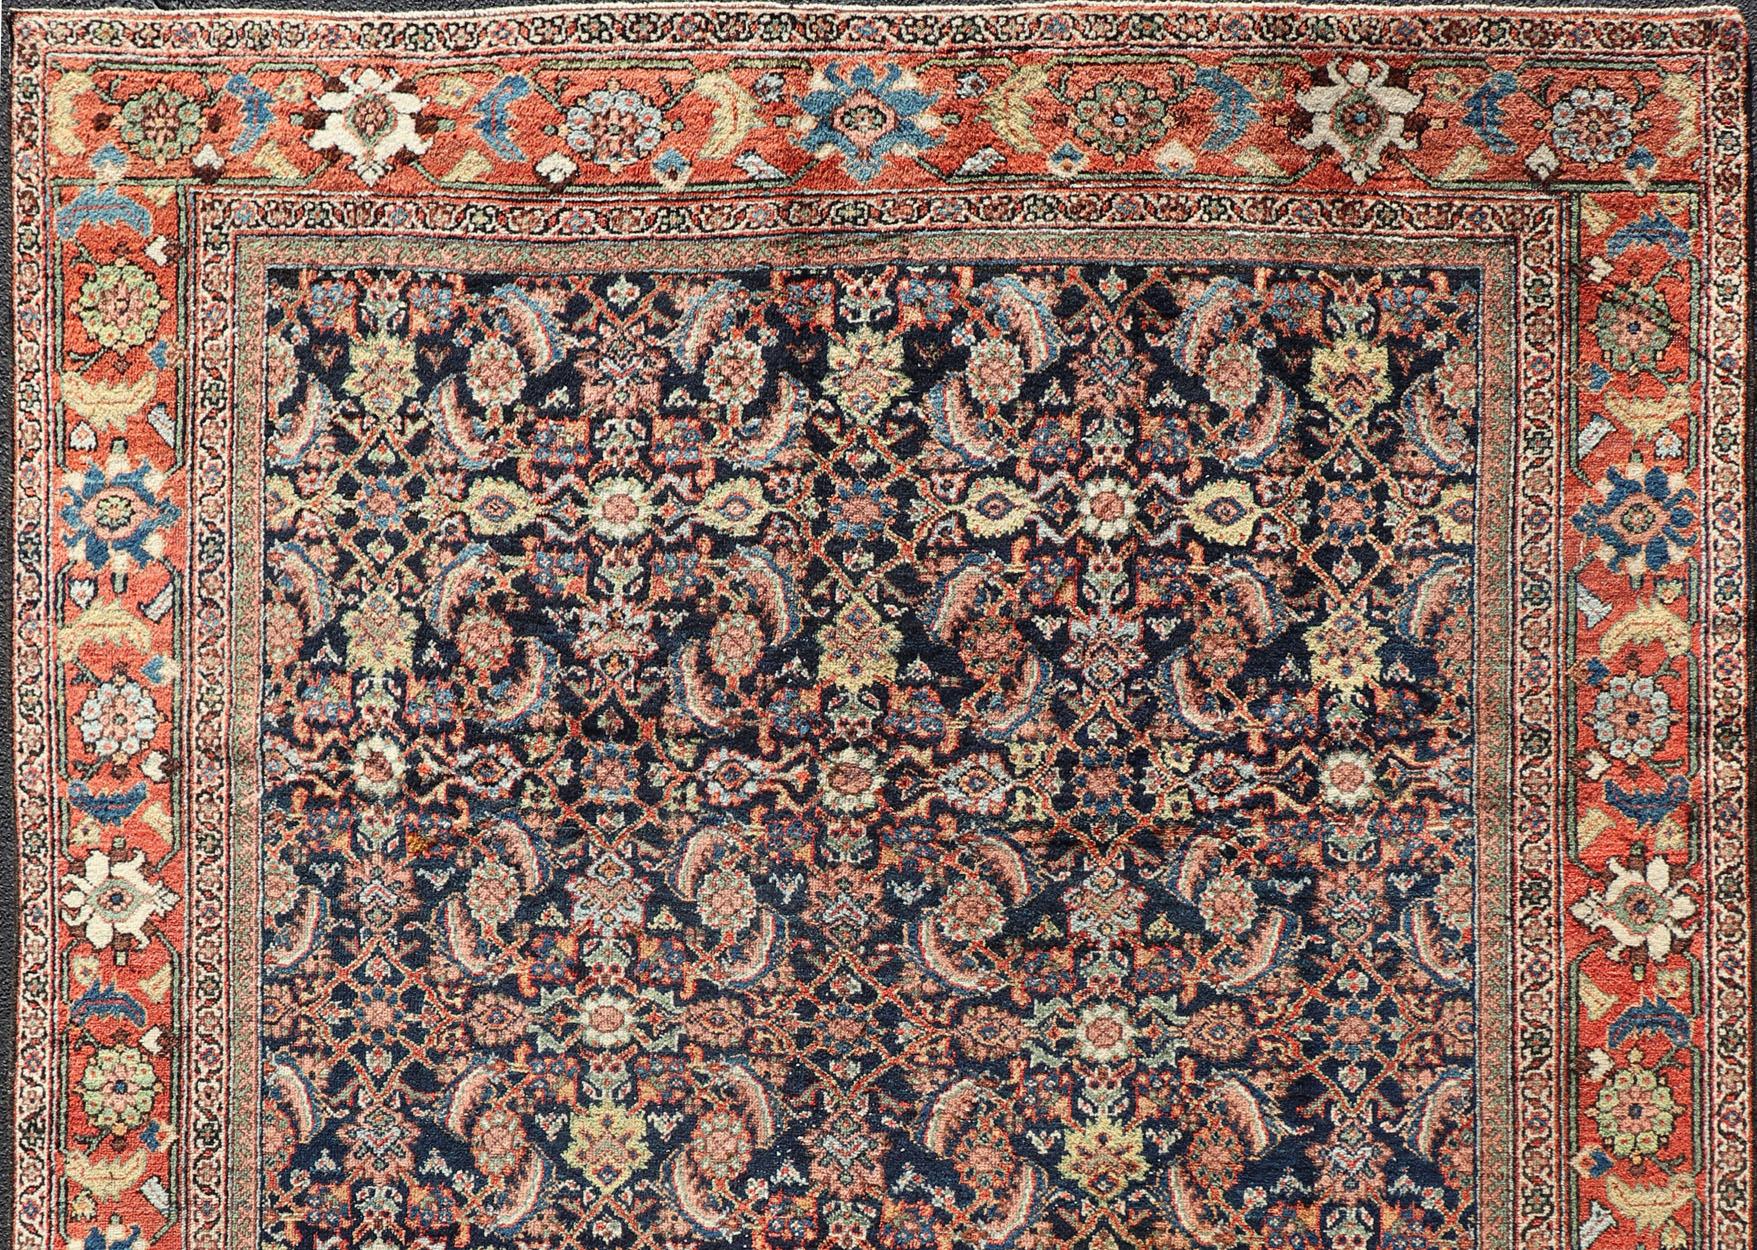 Antique Persian Sultanabad rug in blue background in multi colors. rug R20-0802, country of origin / type: Iran / Sultanabad, circa 1910. 

This antique Persian Sultanabad-mahal rug features an all over Herati pattern with the coloration